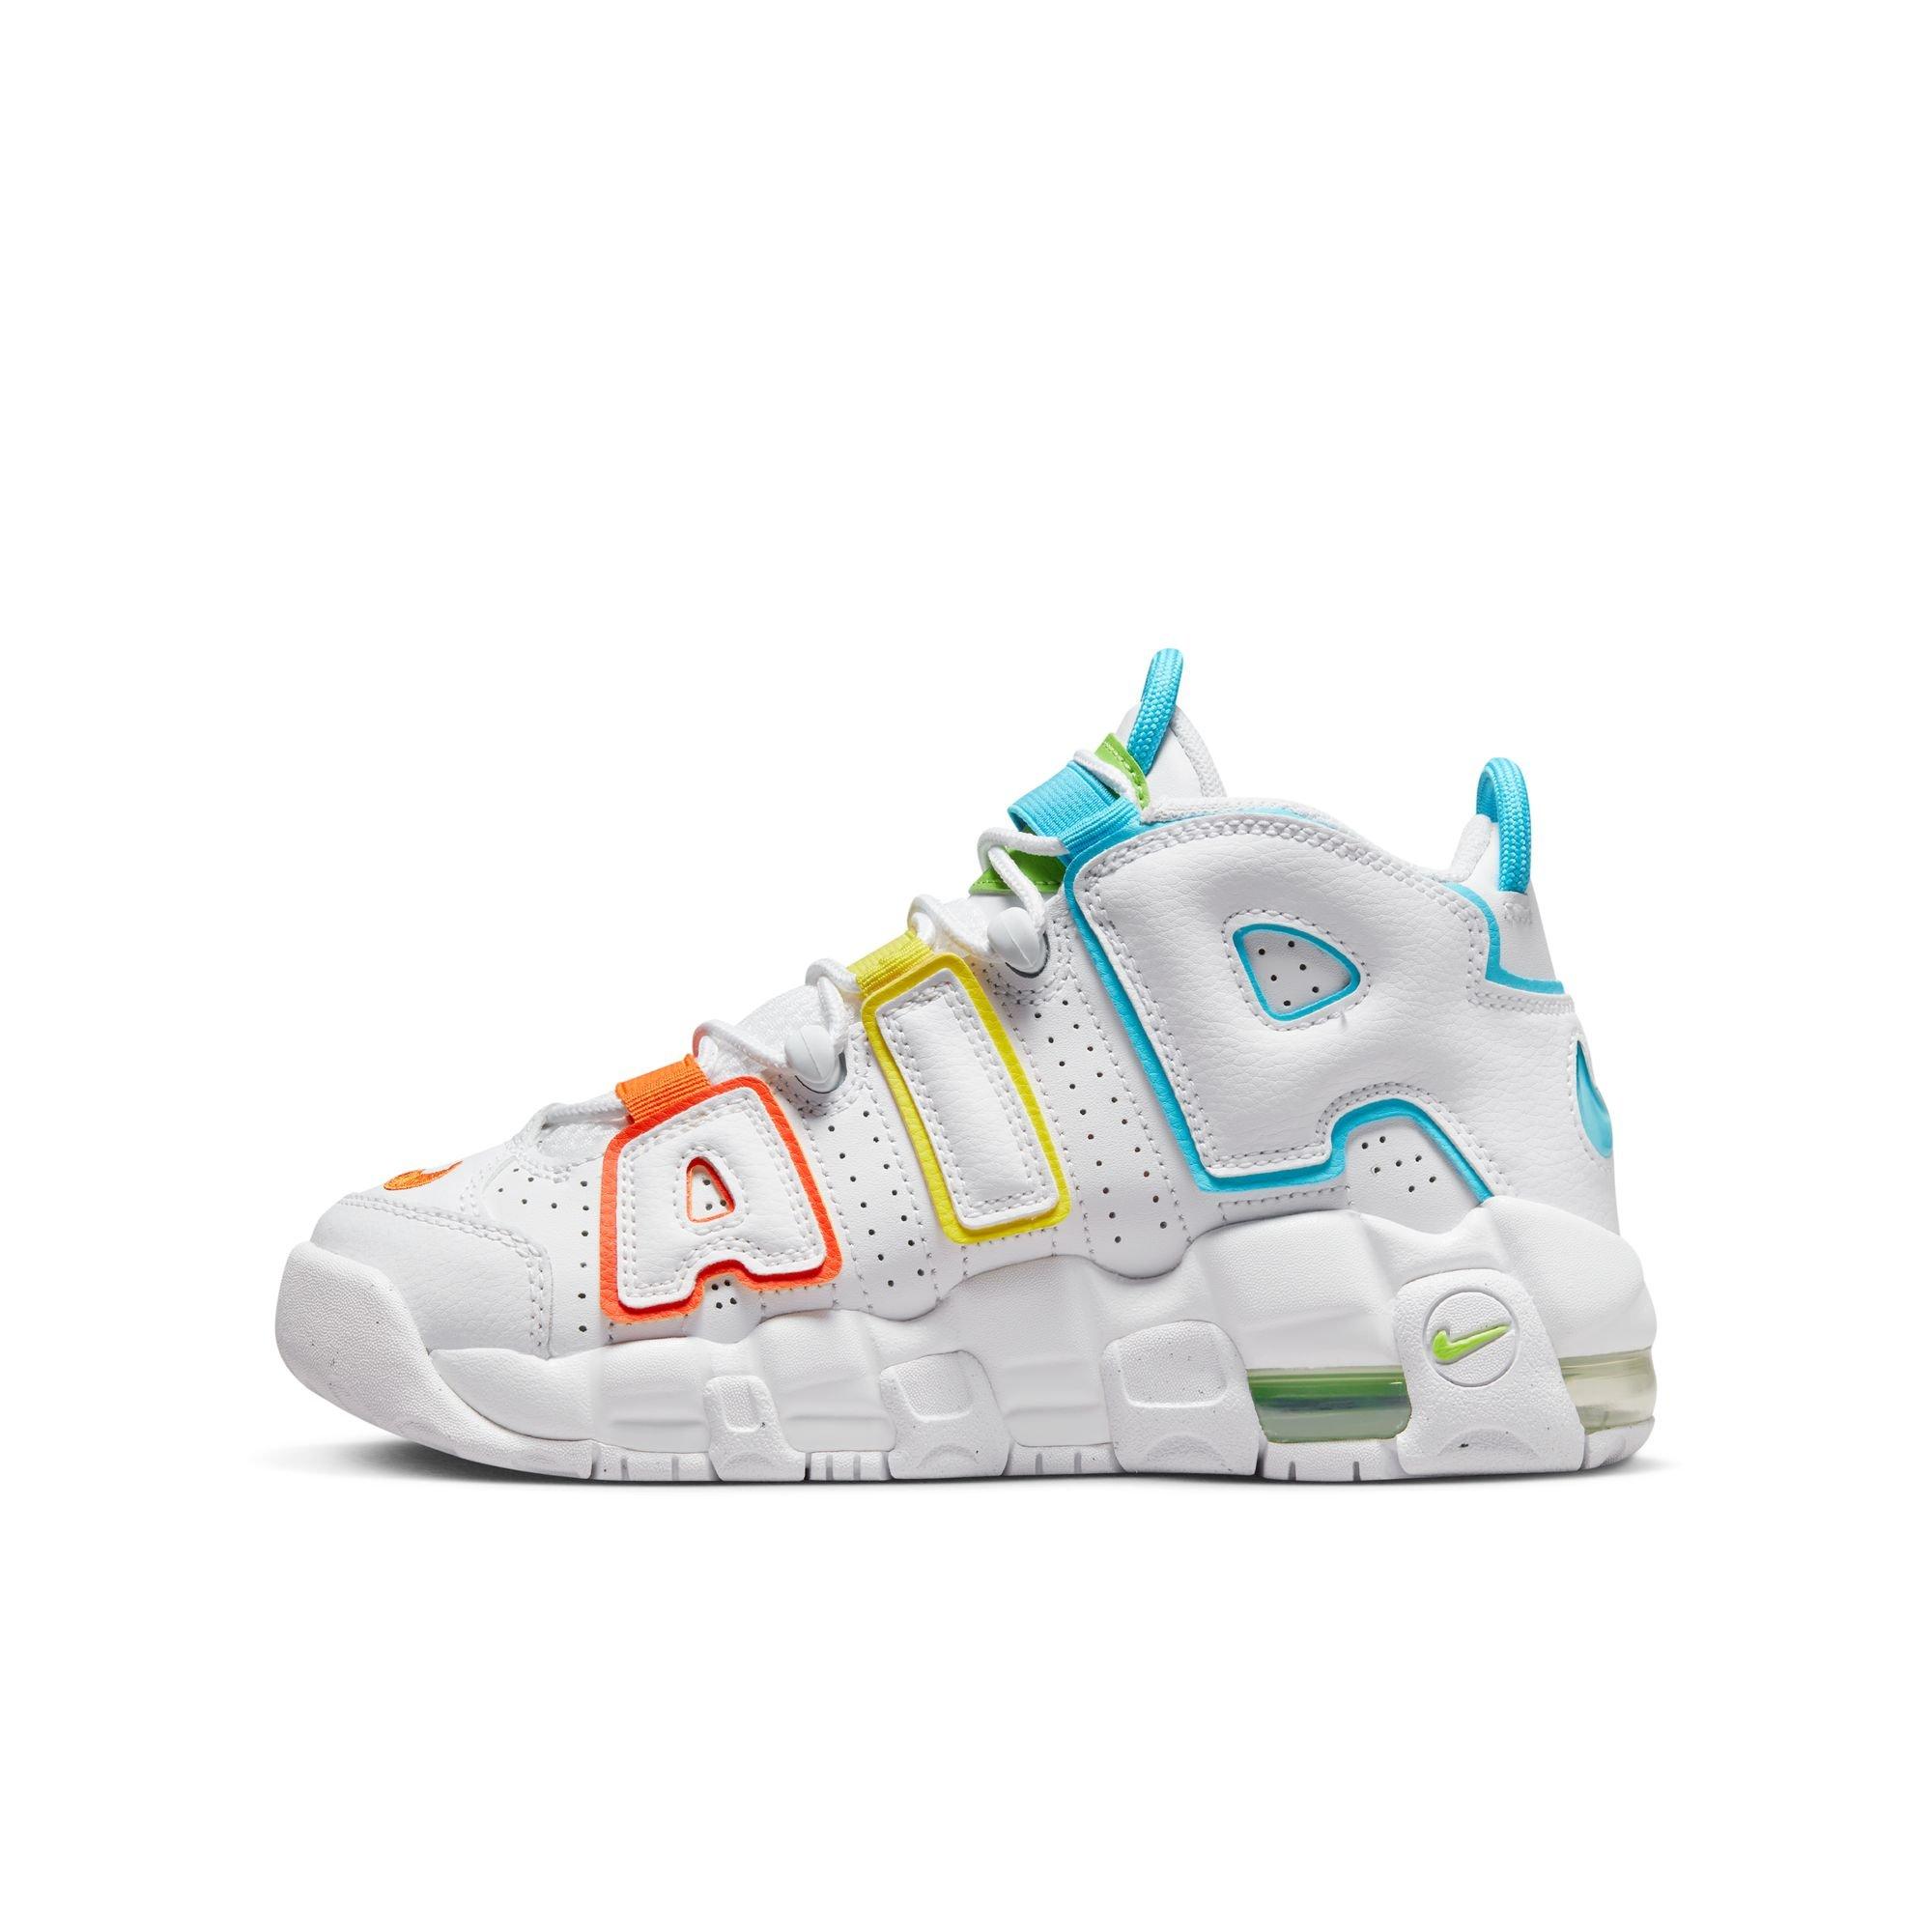 Bold, in-your-face style—the Nike Air More Uptempo is an icon in